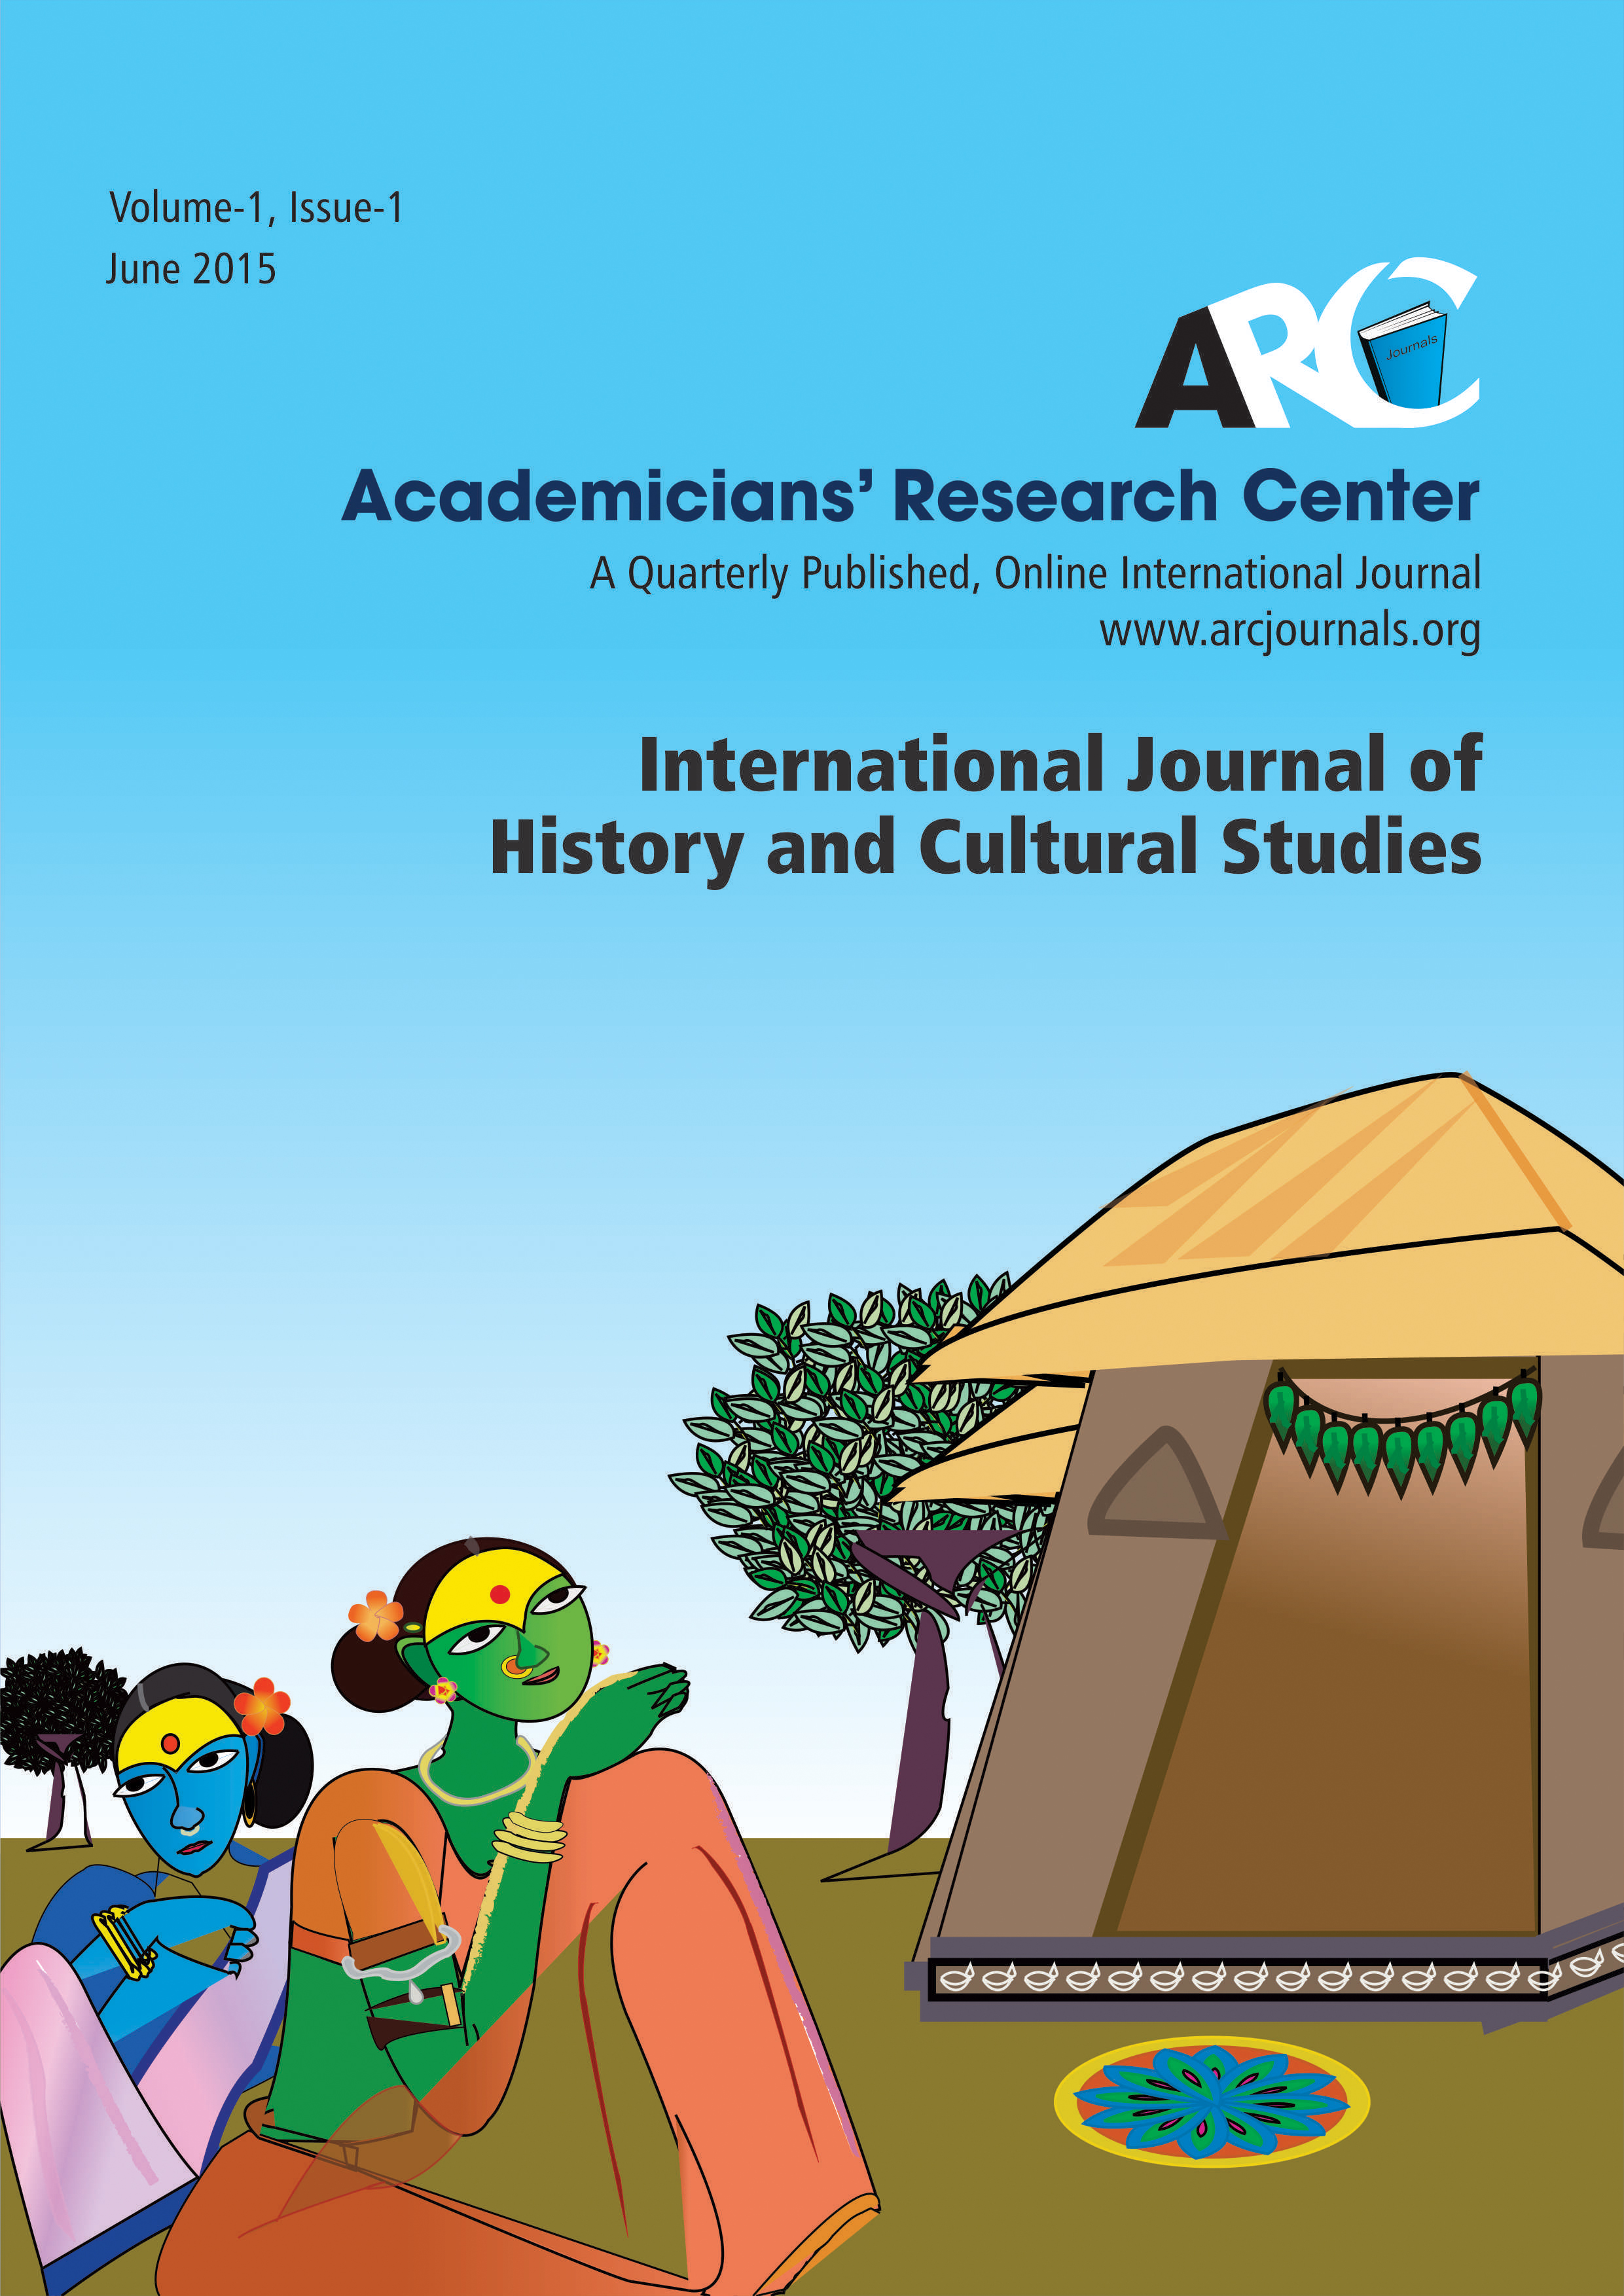 Journalson History and Cultural Studies|History Journals| Top Journals